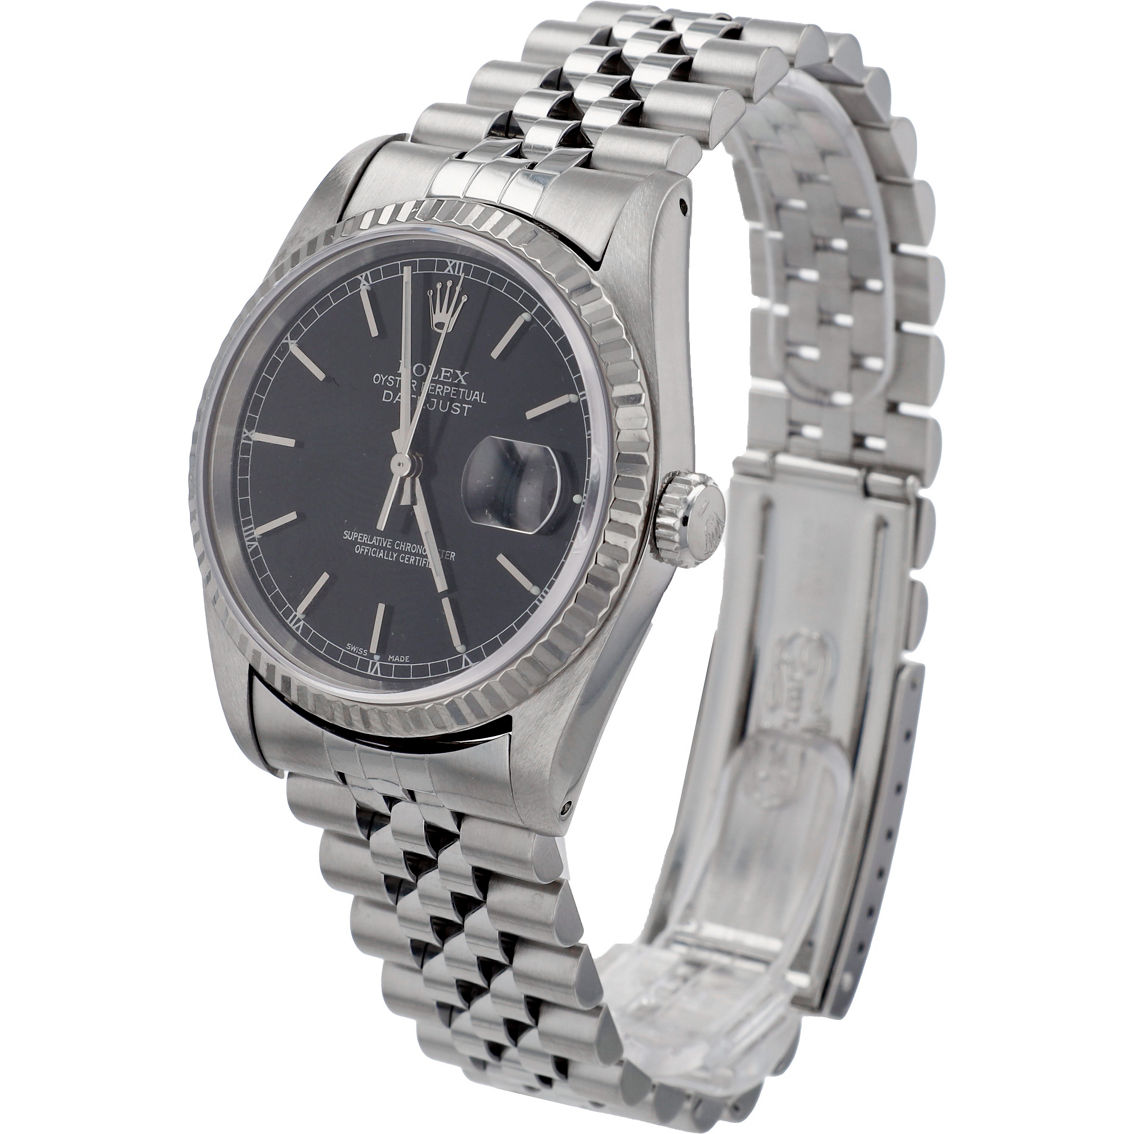 Rolex Men's Datejust Watch WLROLEX:OE88 (Pre-Owned) - Image 3 of 5